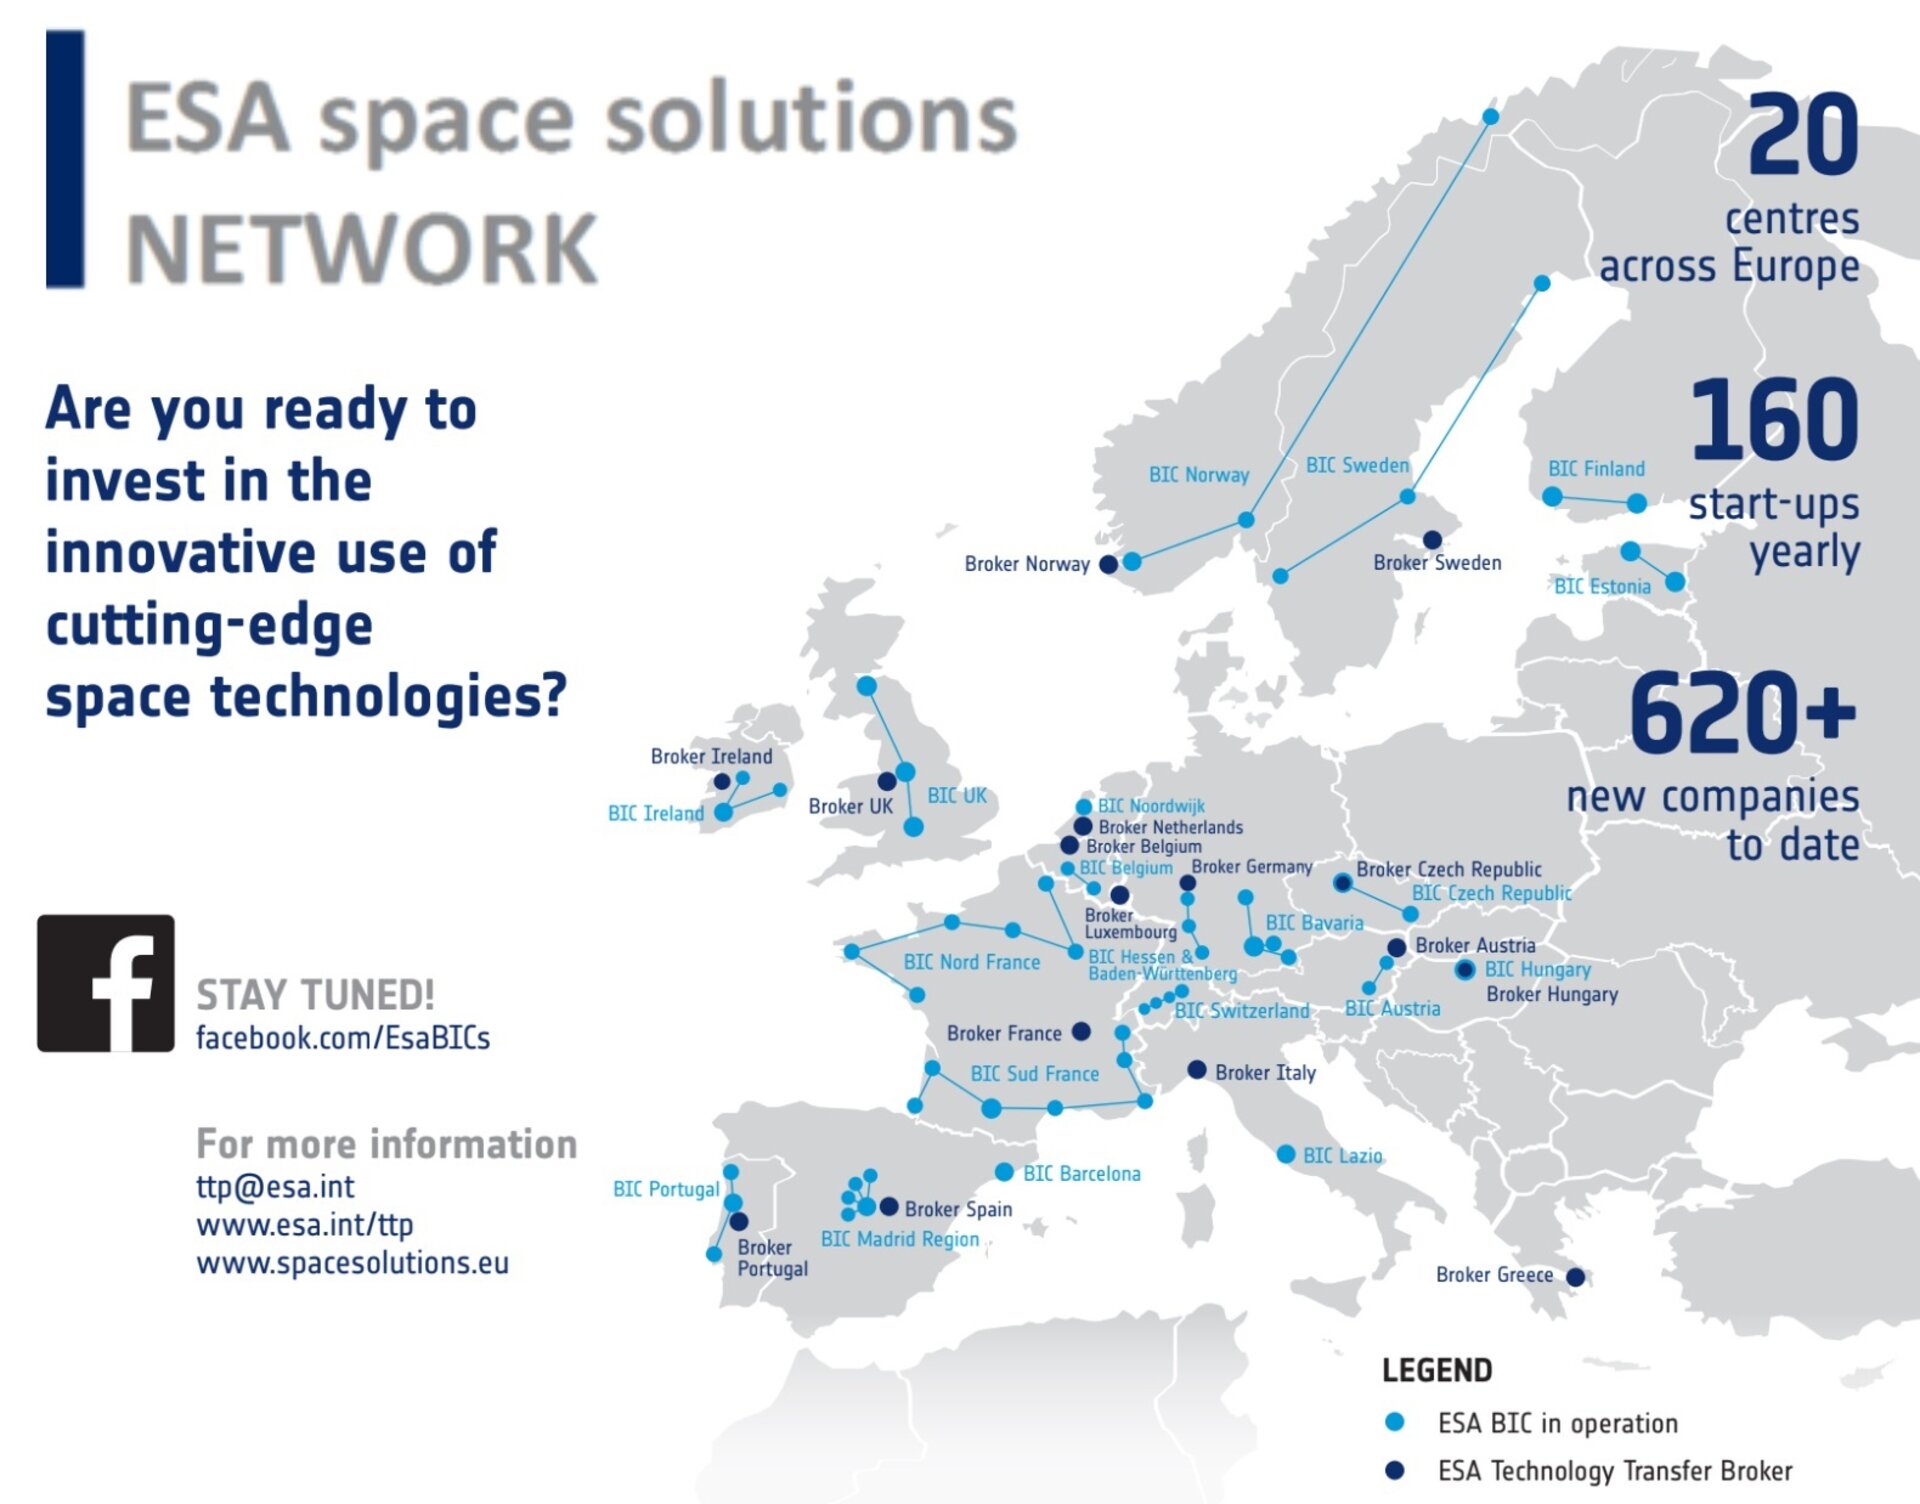 ESA Business Incubation Centres and Technology Transfer Brokers